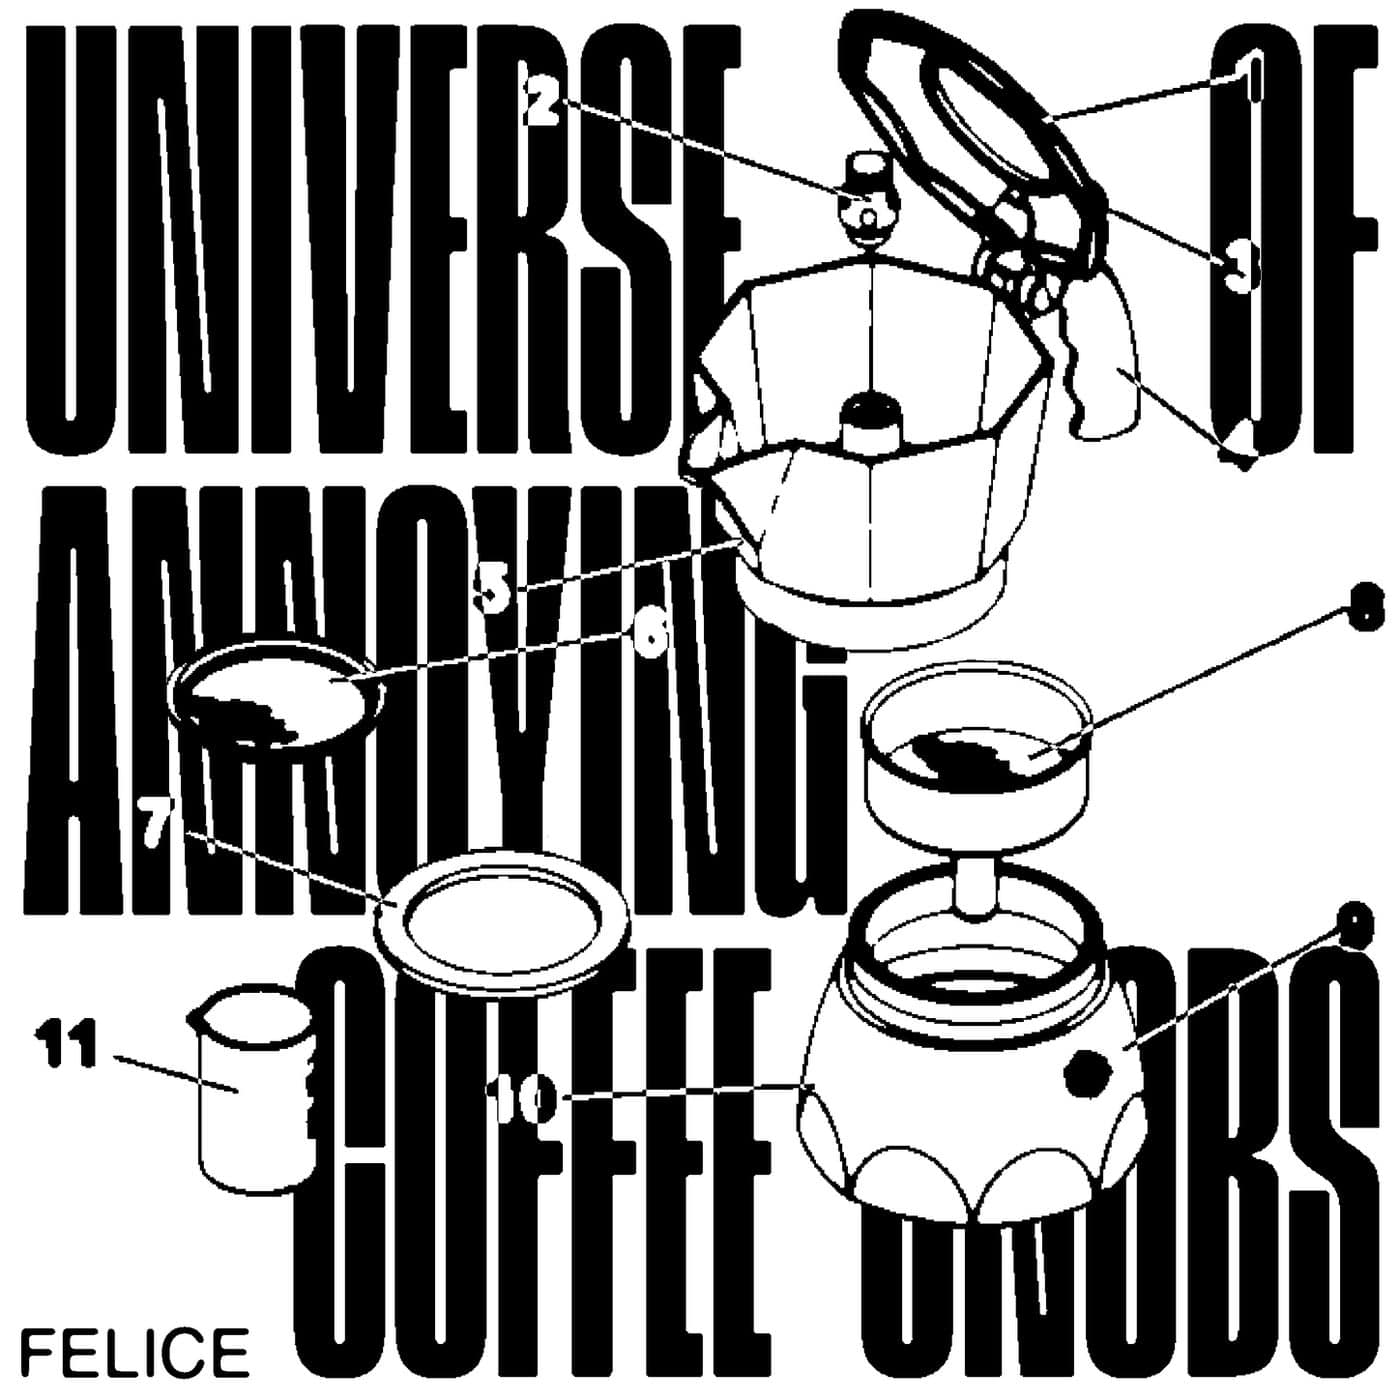 Download Felice - Universe of Annoying Coffee-Snobs on Electrobuzz